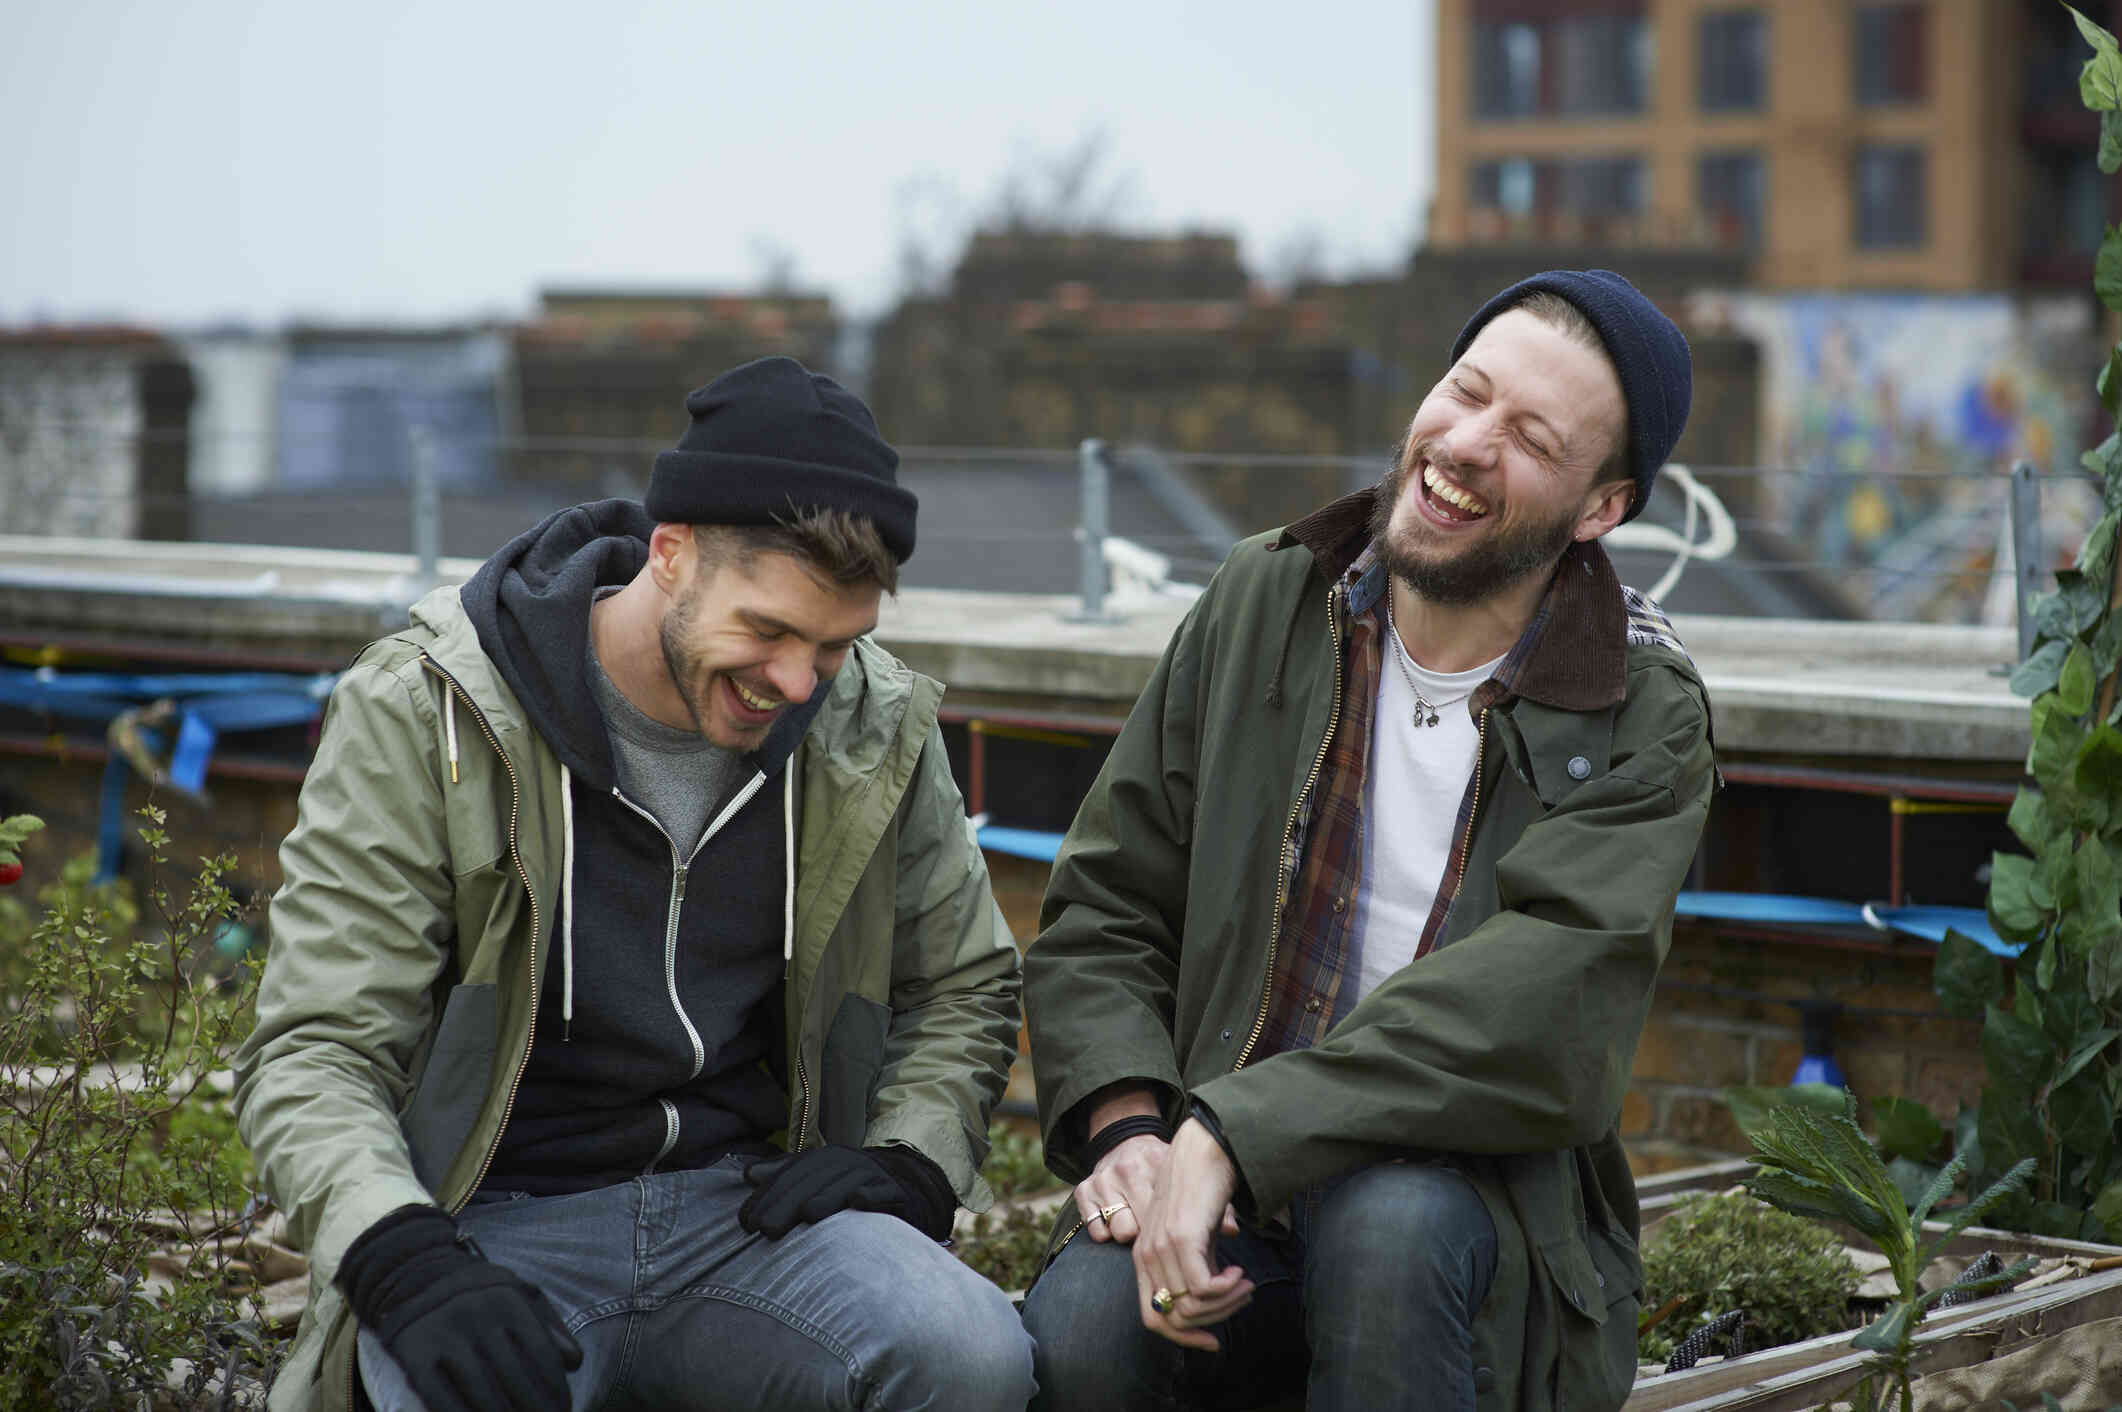 Two men wearing beanies sit next to each other on a patio while chattnig and smiling.